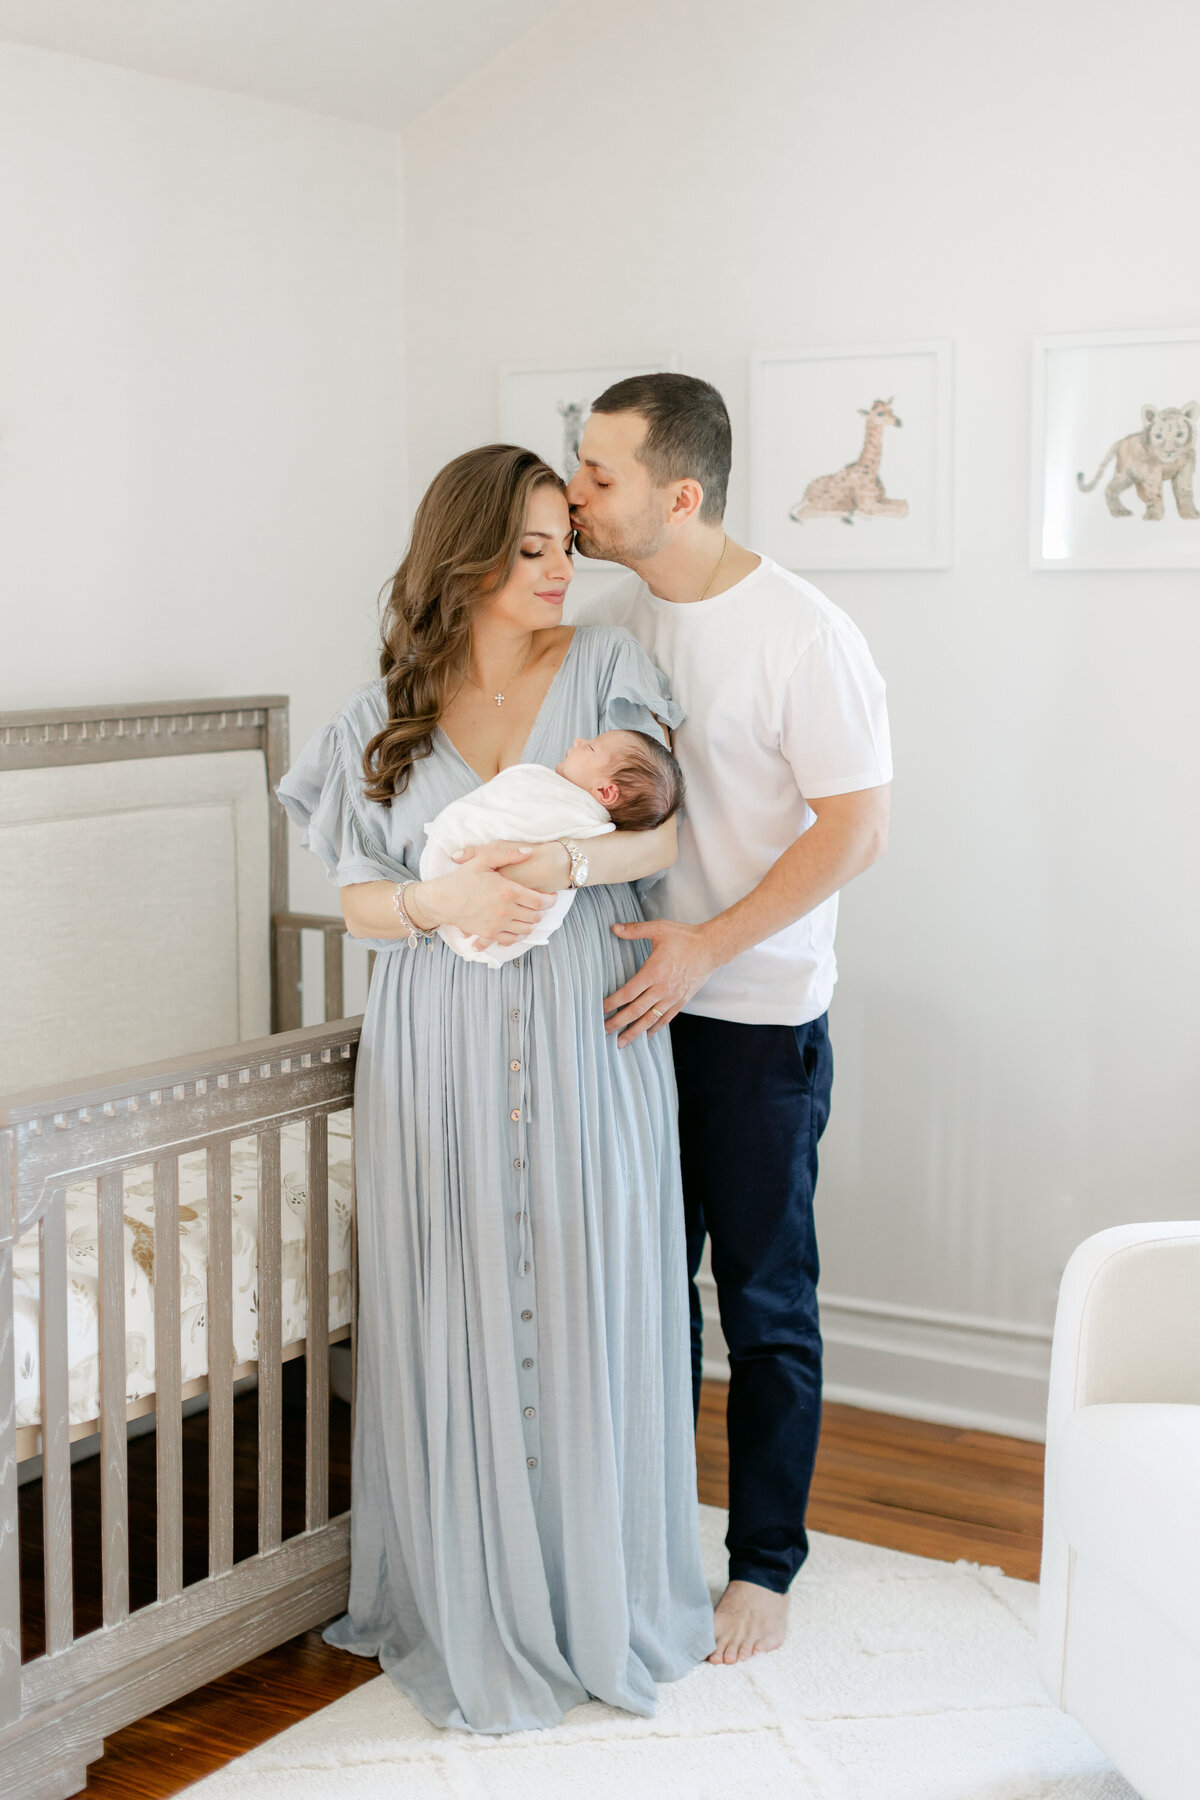 Mom and dad standing by crib captured by South Jersey Newborn Photographer Tara Federico